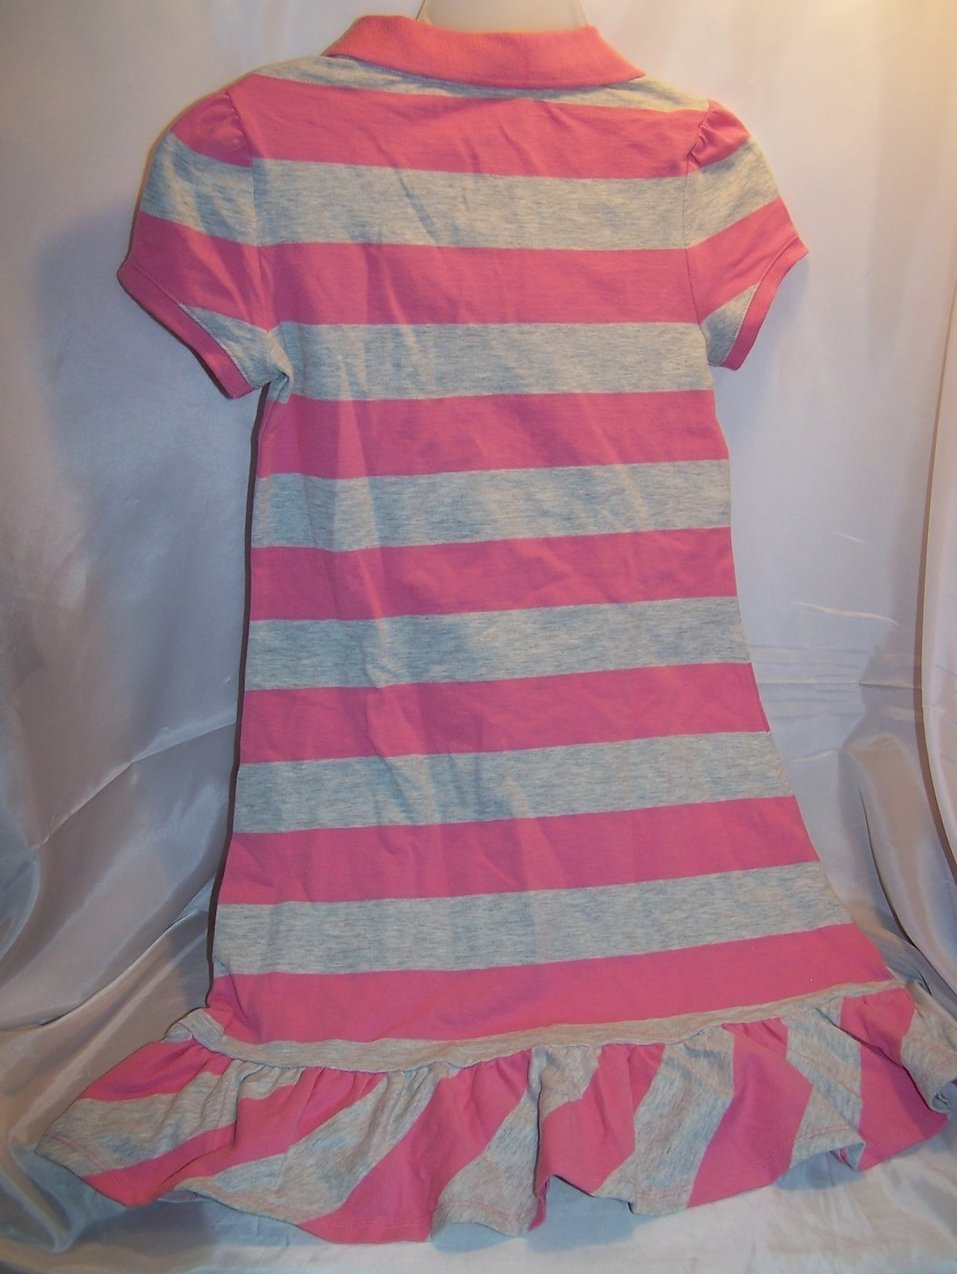 Image 1 of New Sz L 10, 12 Old Navy Pink and Gray Striped Dress